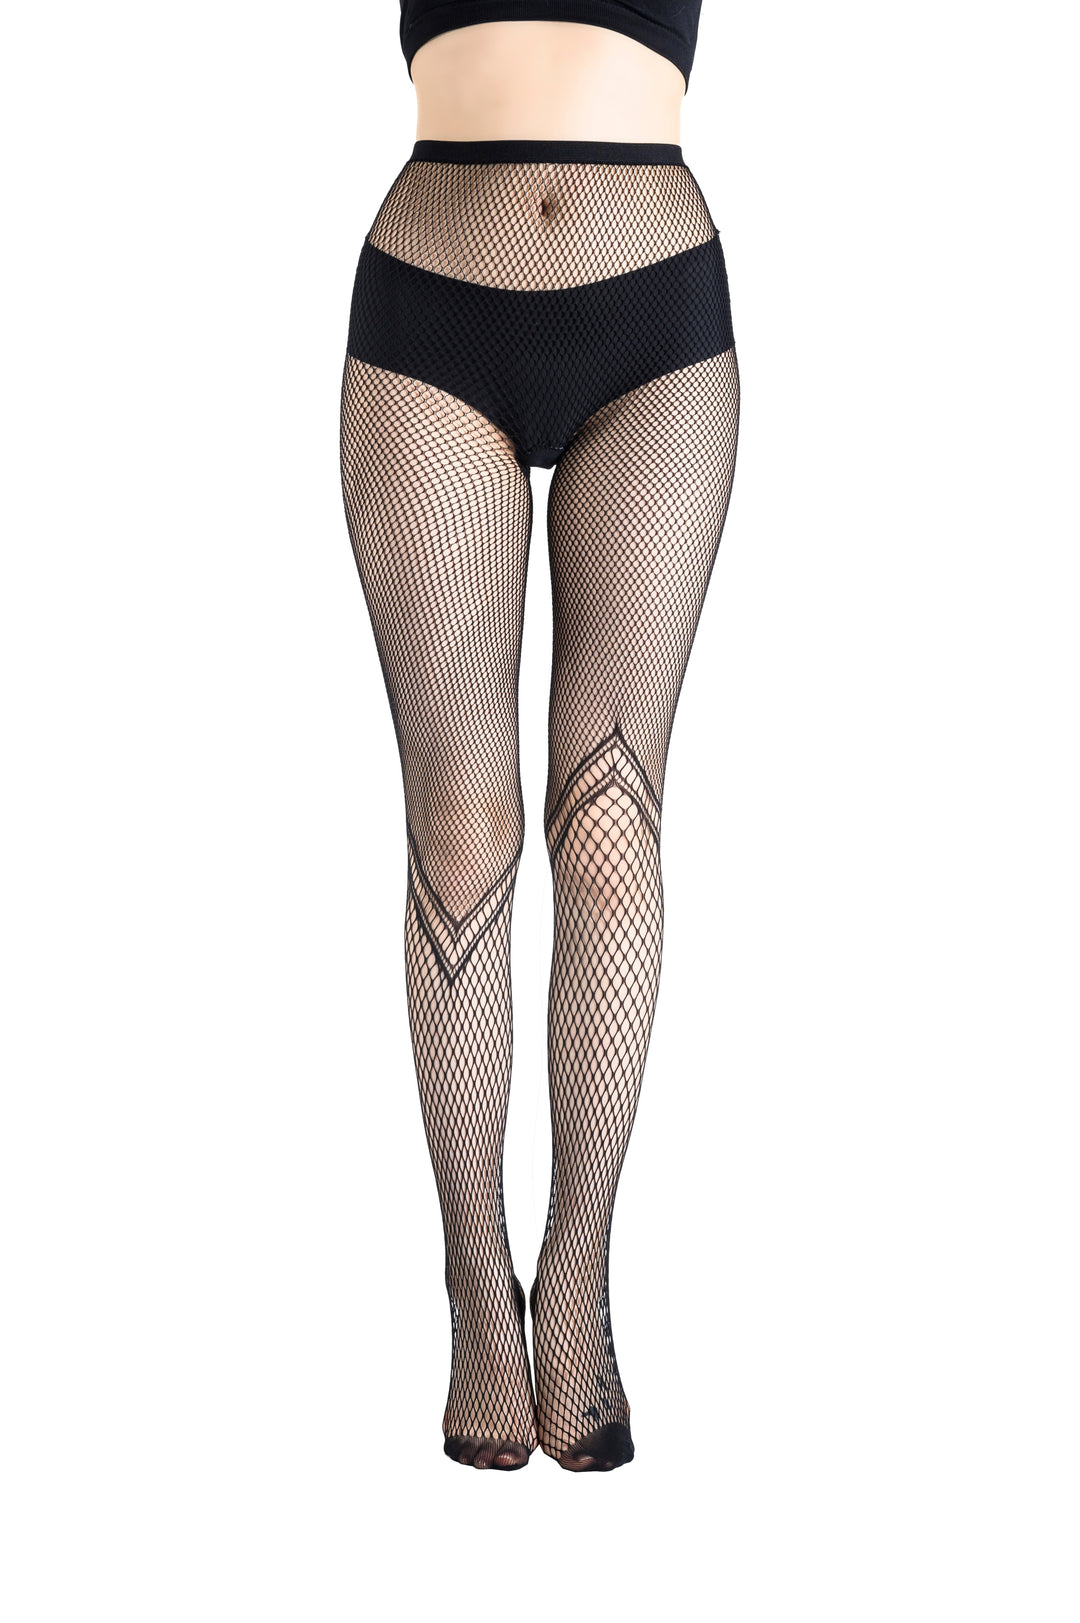 Fishnet Tights 111041-2 Front